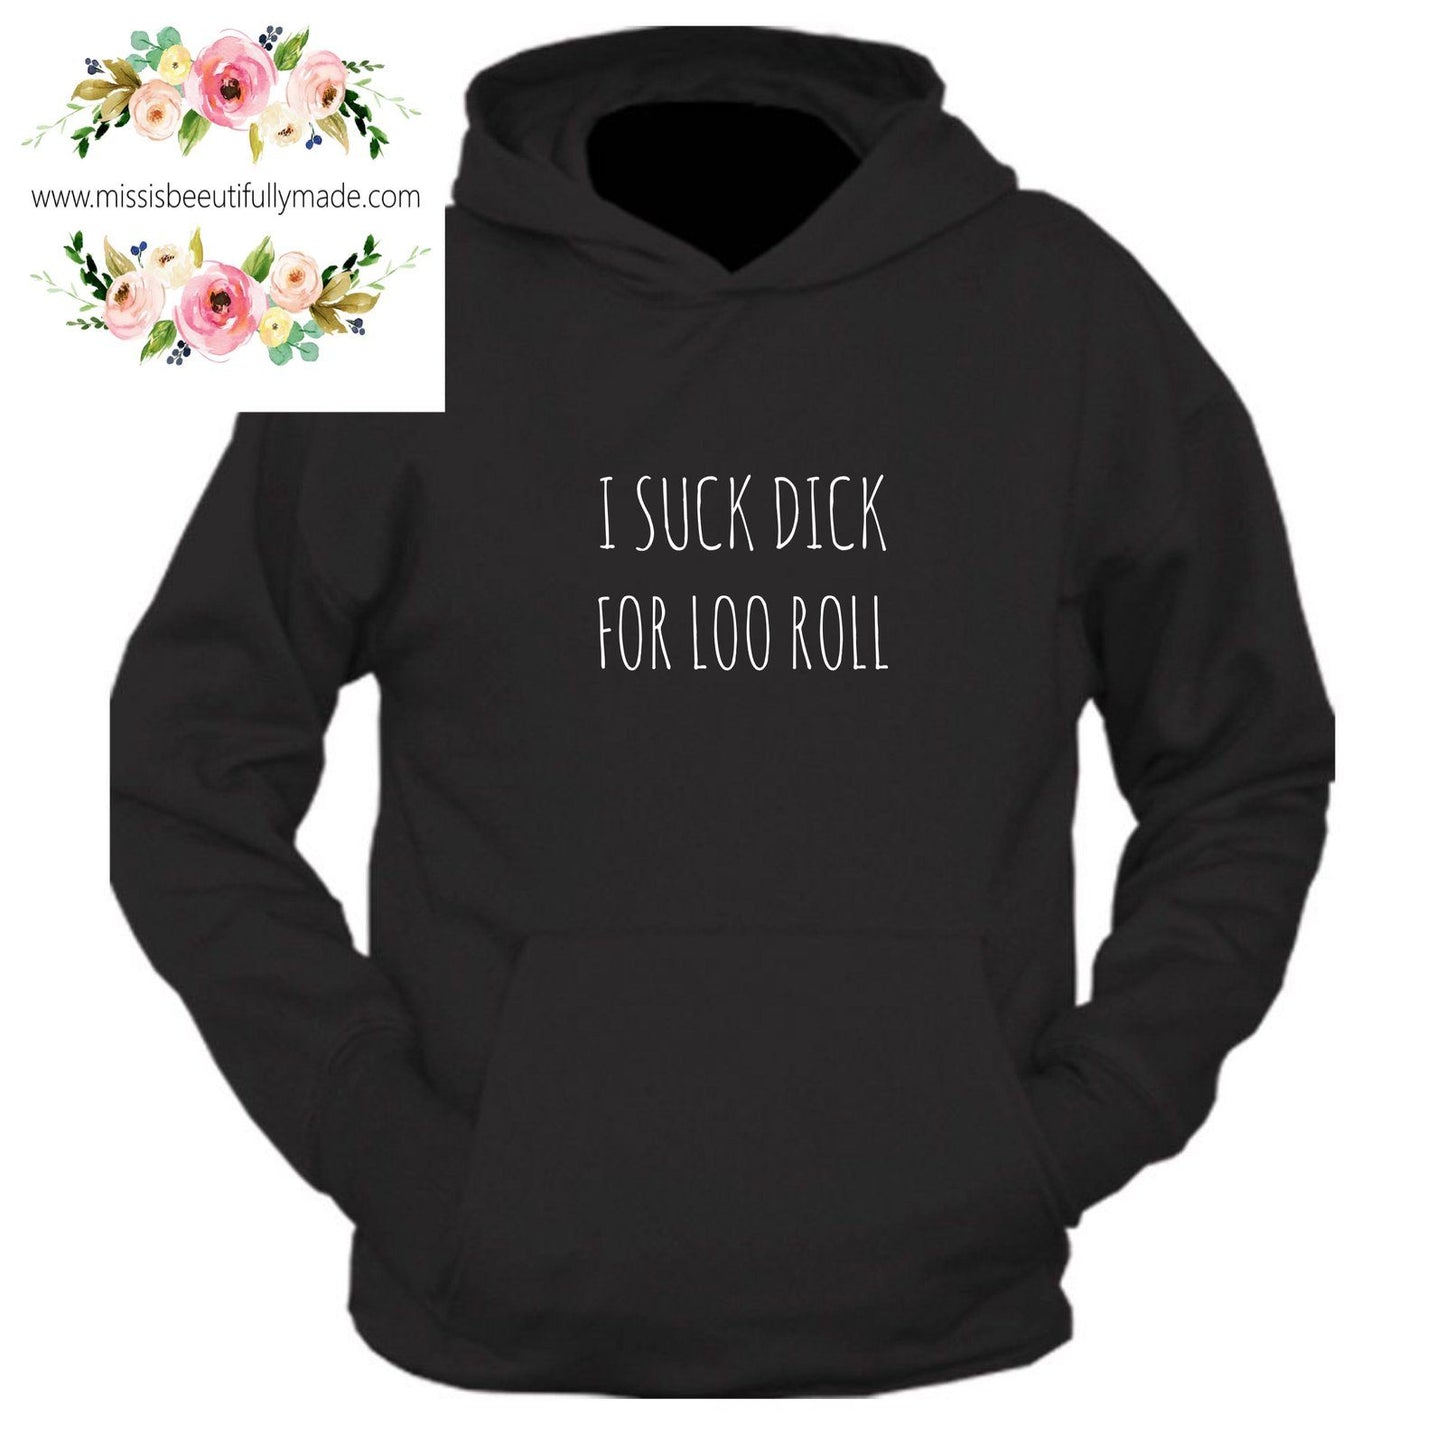 Hoody- I suck dick for loo roll